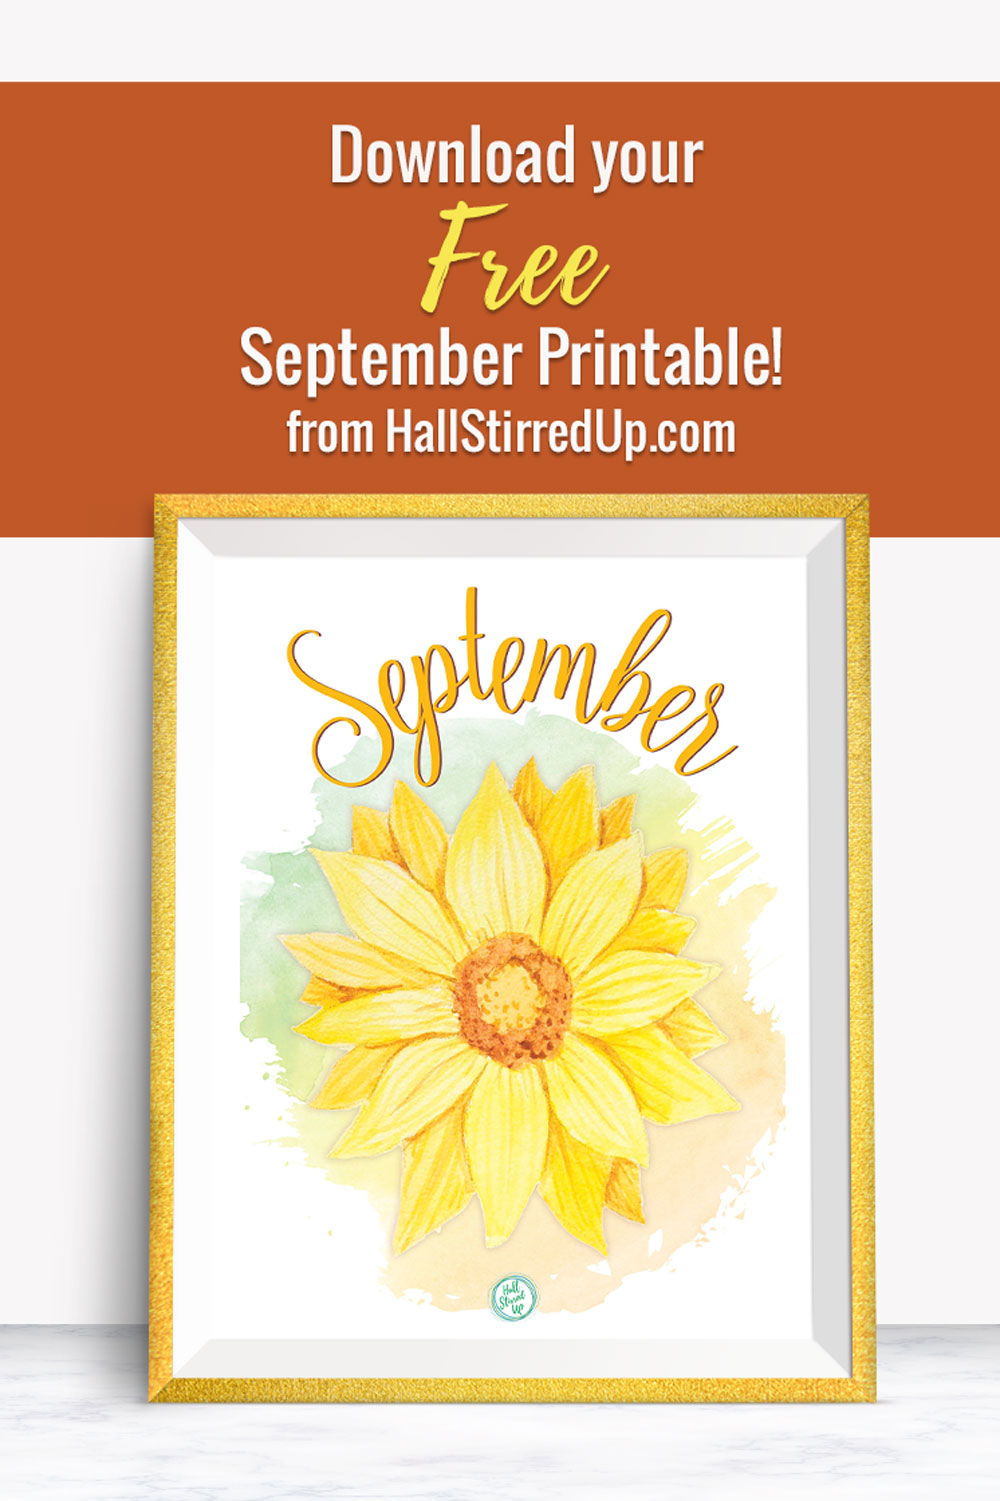 September is here and that means a new free printable